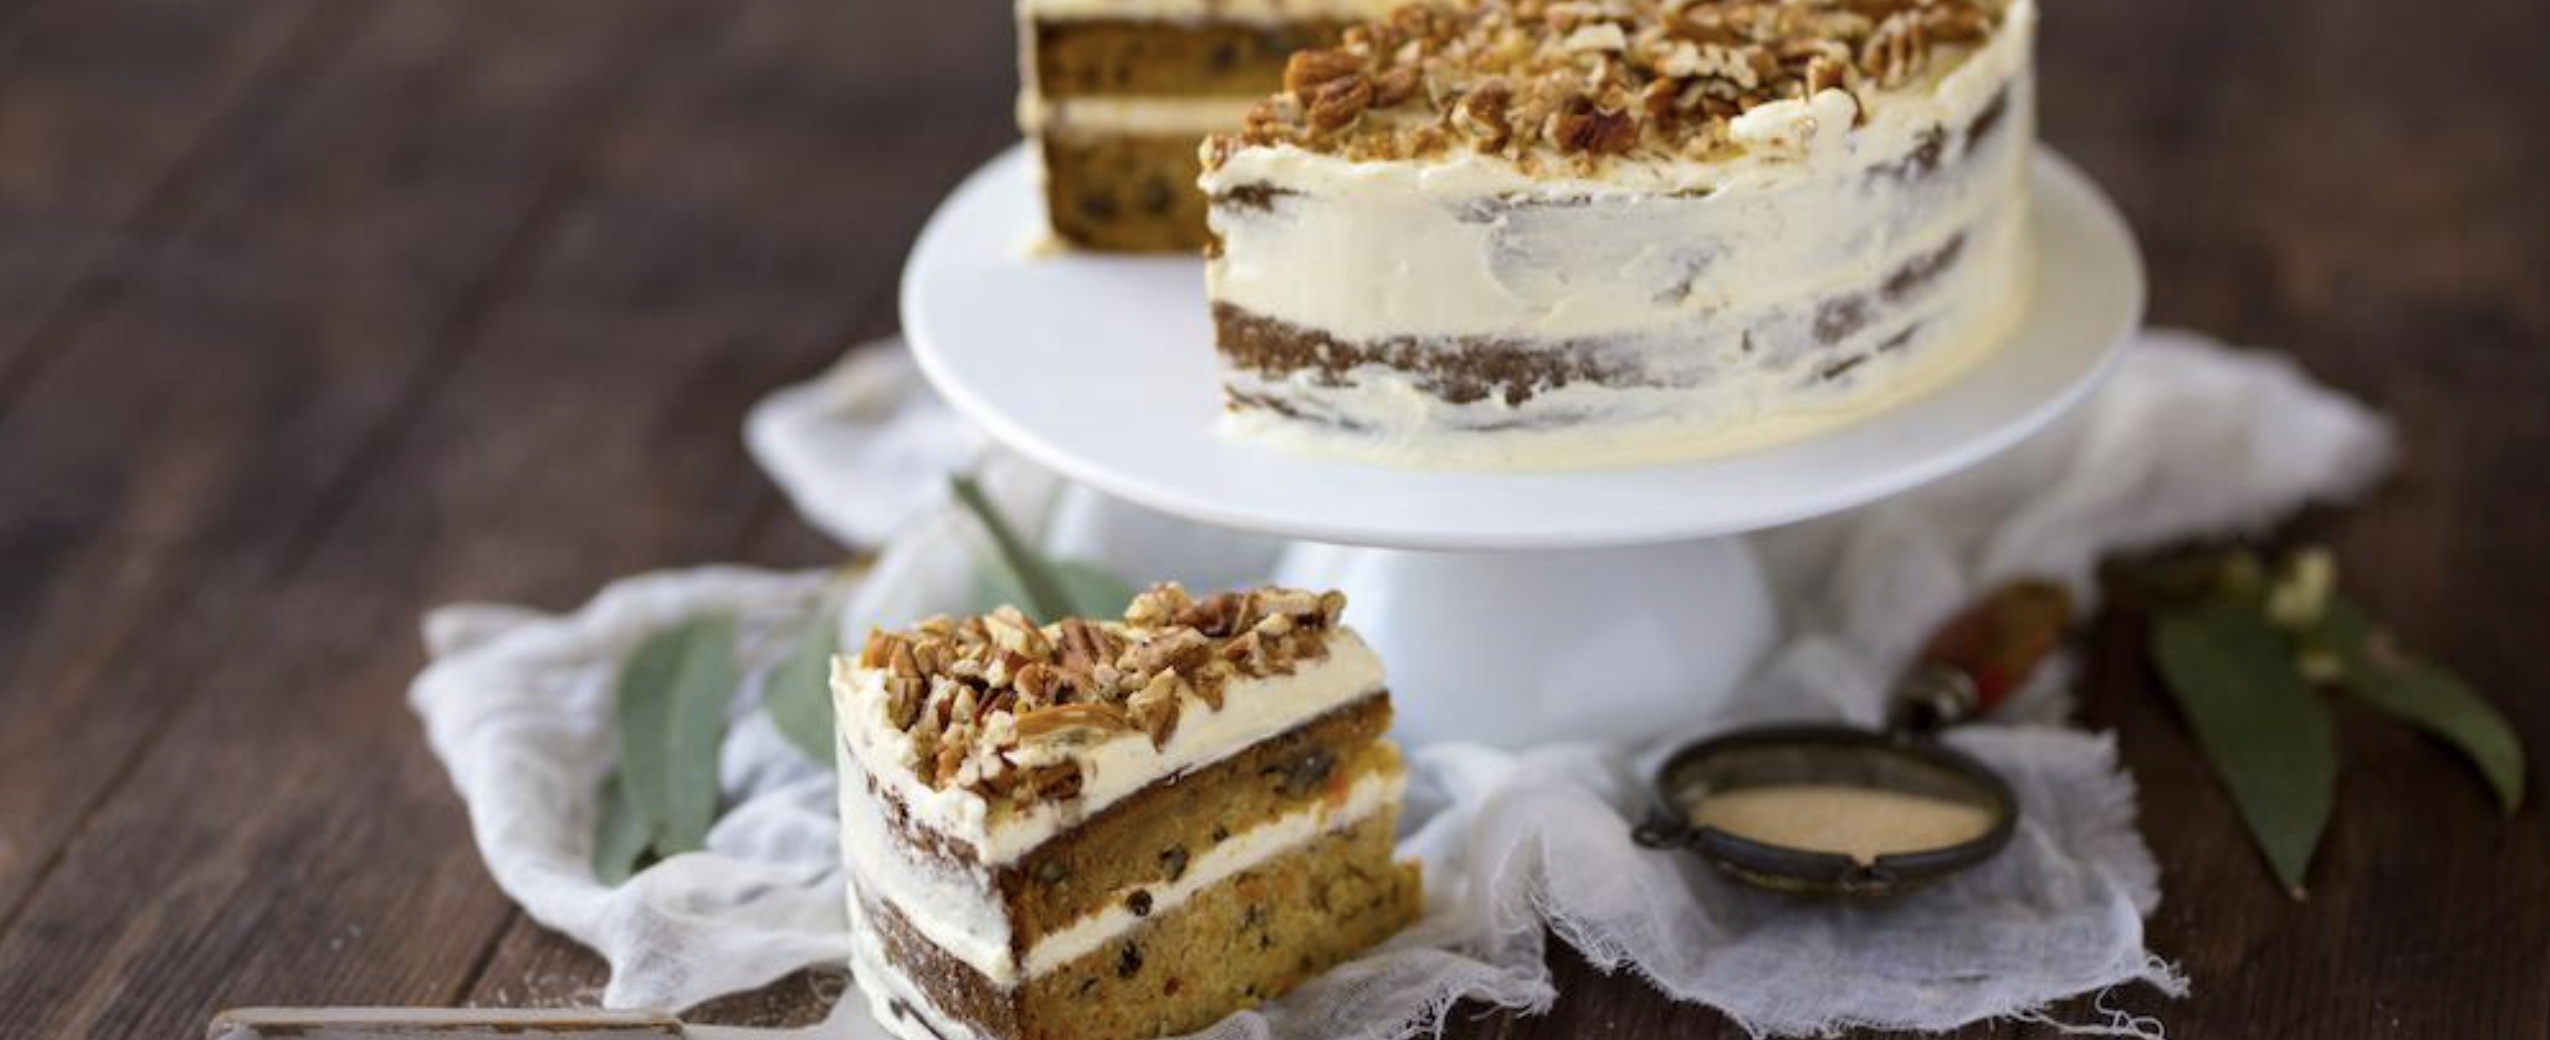 Lakanto Carrot and Pecan Cake with Cream Cheese Icing